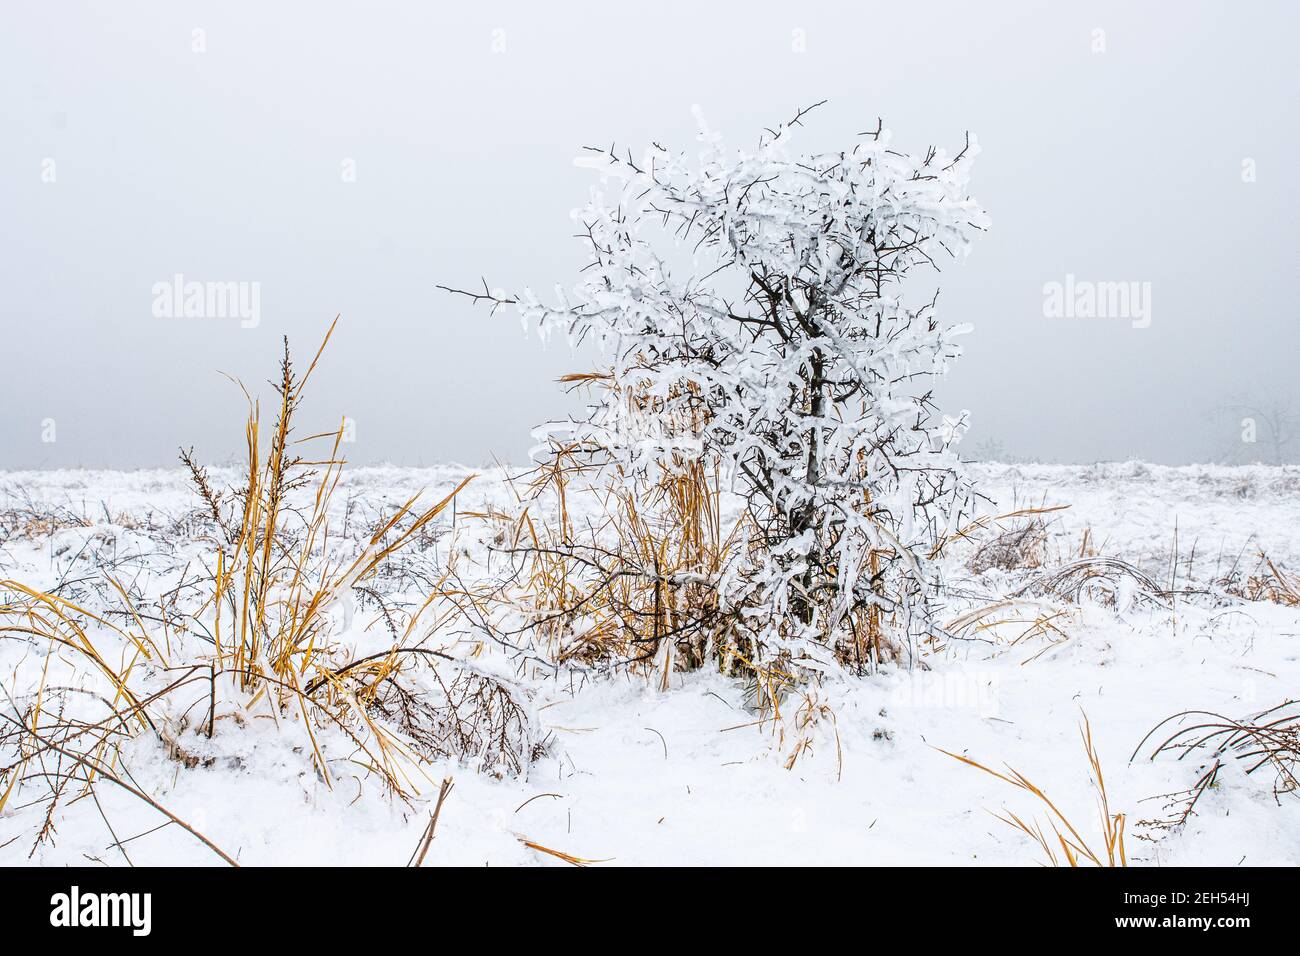 A small shrub is covered in ice. Stock Photo